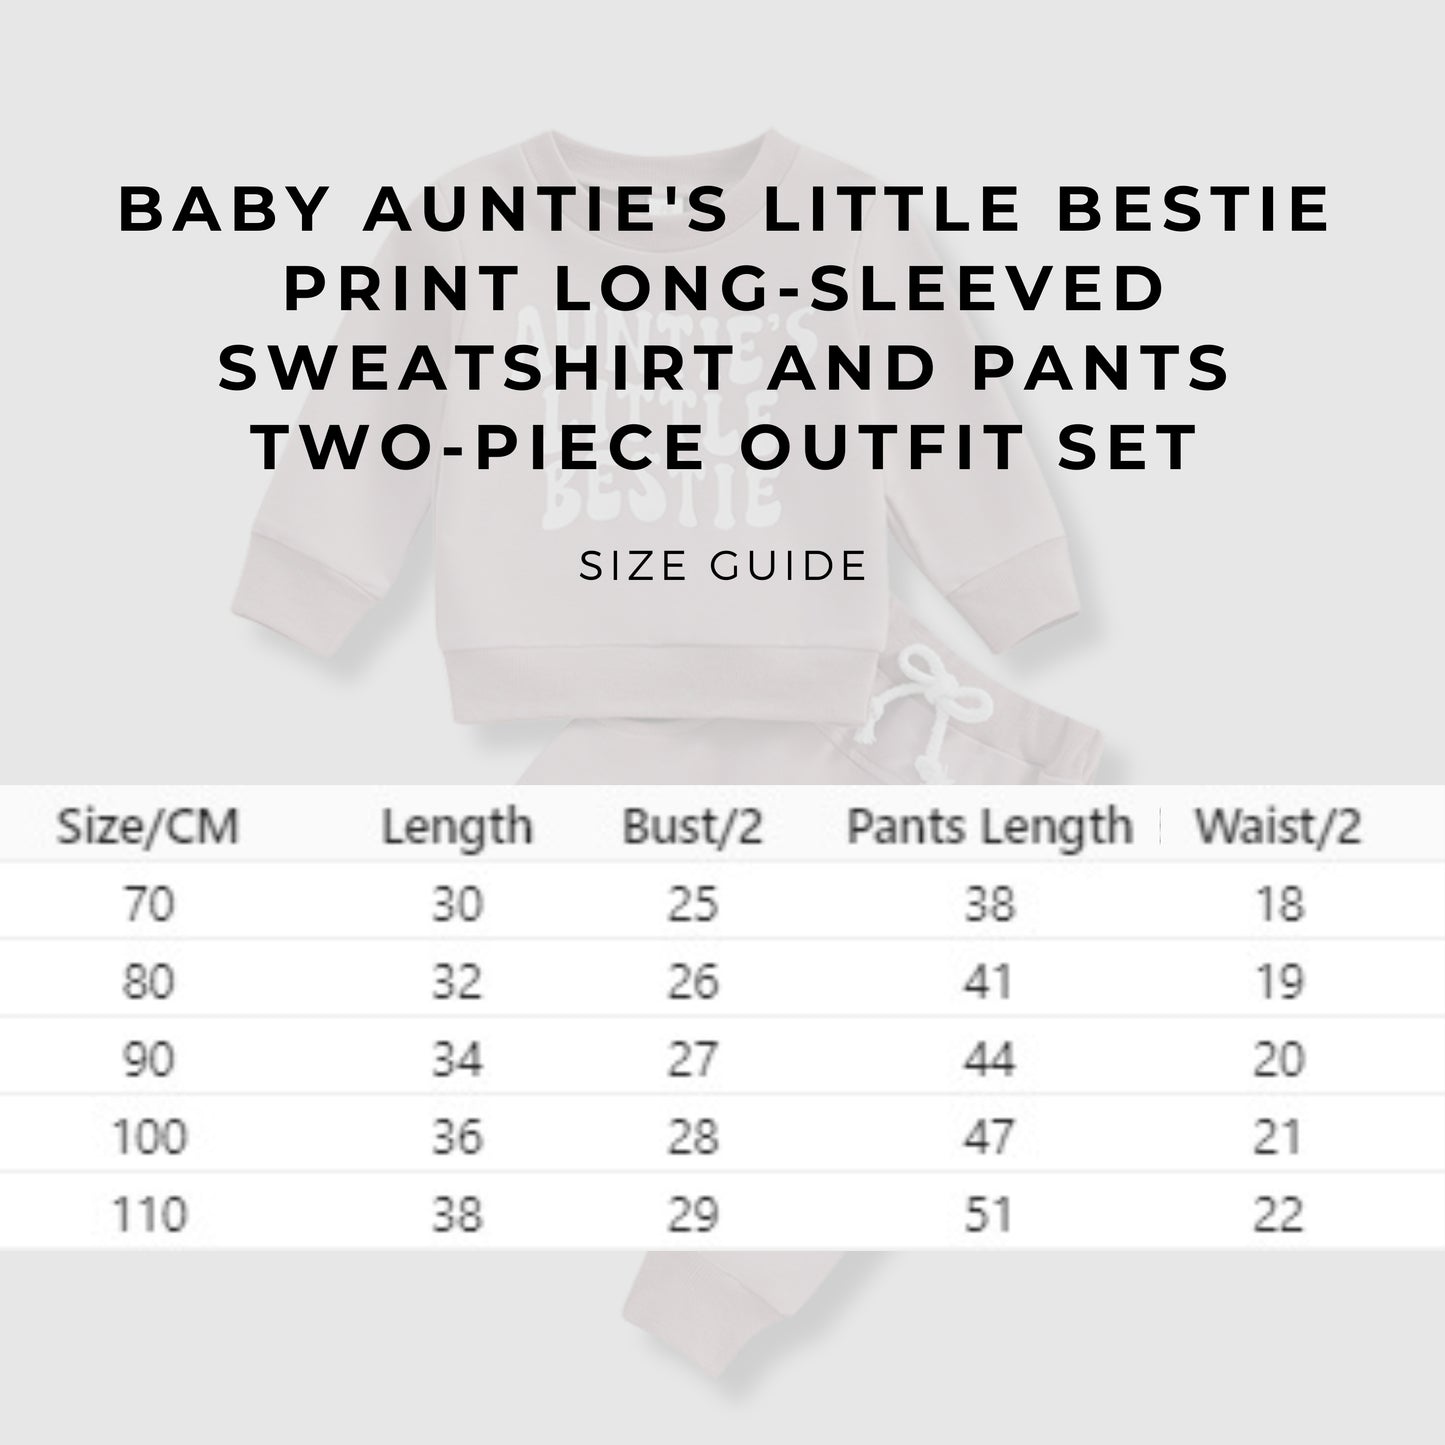 Baby Auntie's Little Bestie Print Long-sleeved Sweatshirt and Pants Two-piece Outfit Set size